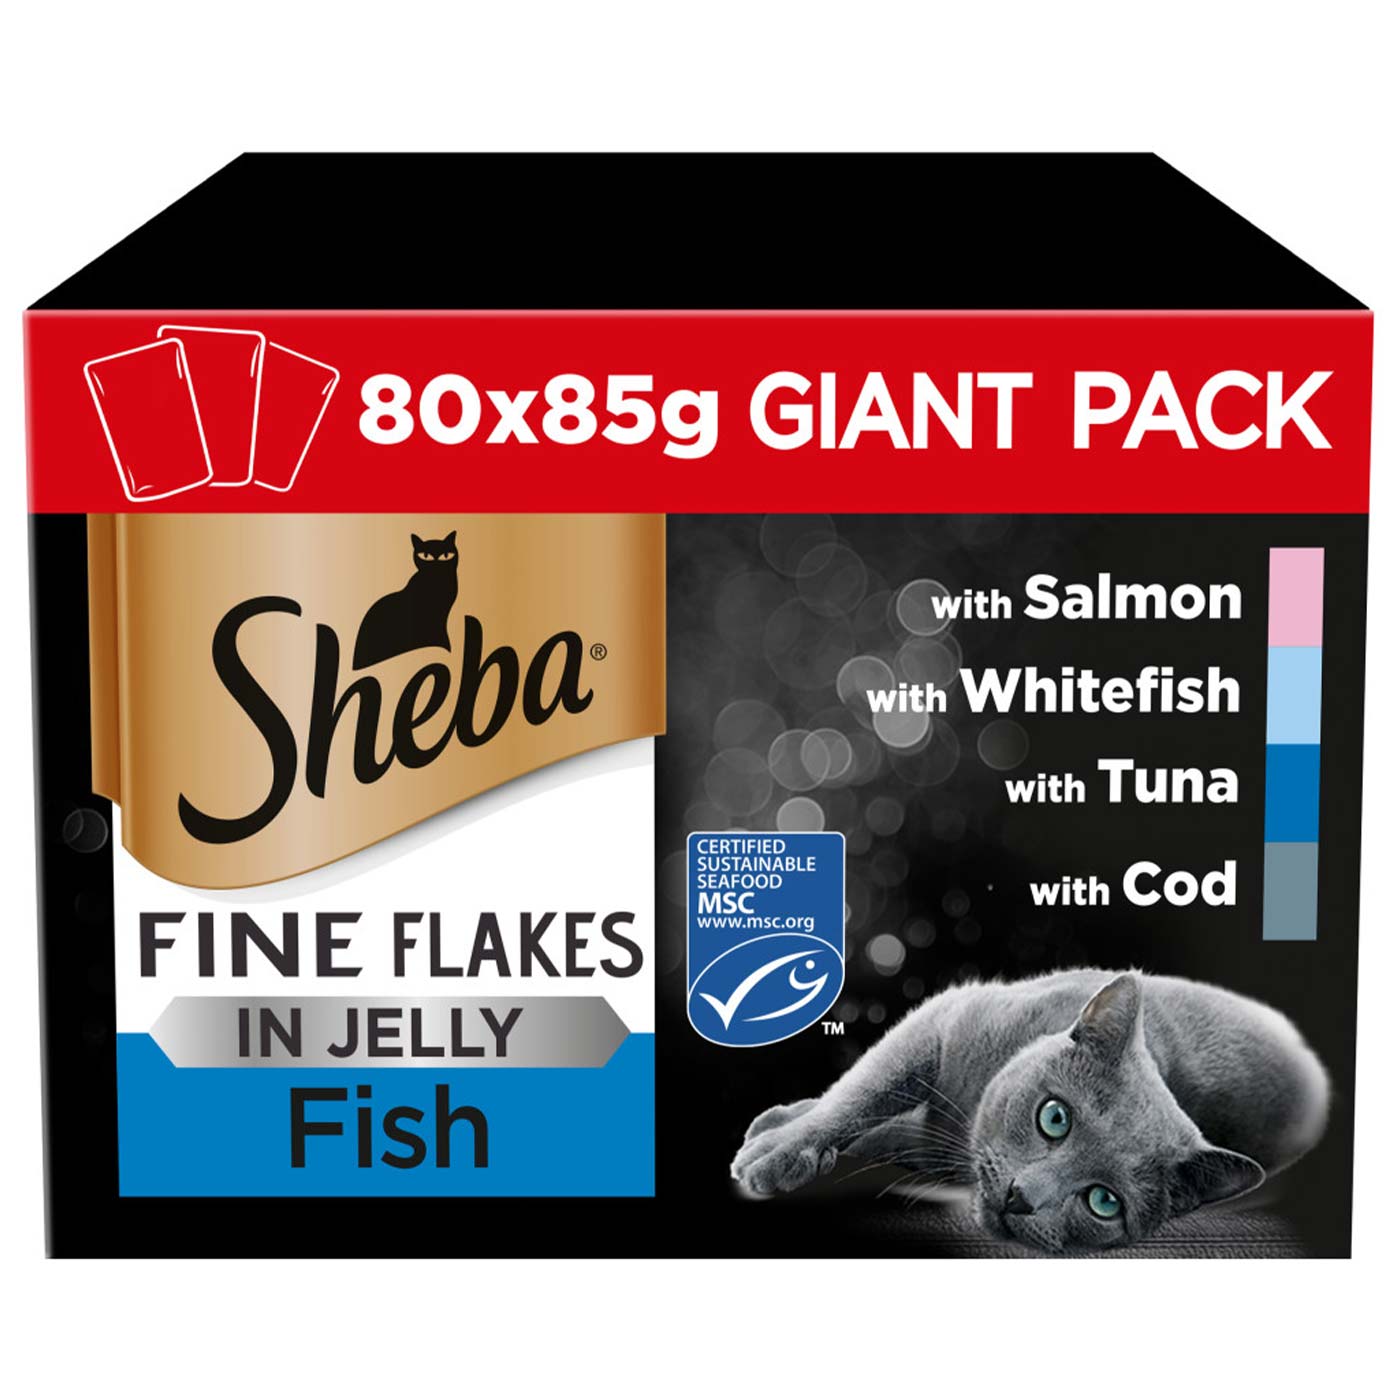 Sheba Fine Flakes Cat Pouches Fish Collection in Jelly Giant Pack (80x85g)